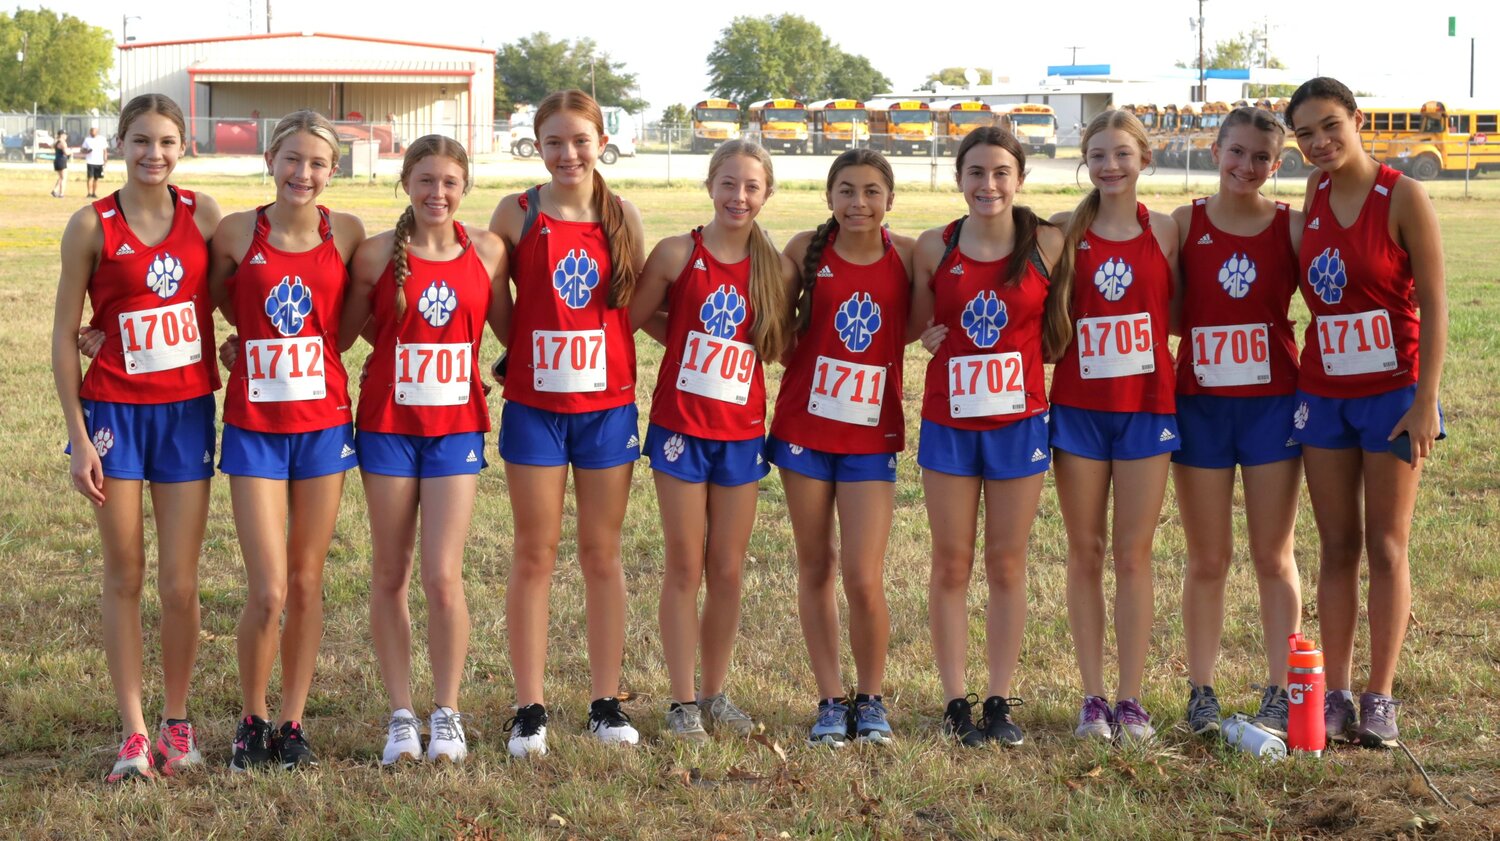 Alba-Golden eighth-grade cross country team of, from left, Briana Ringgold, Averi Stevenson, Callie Campbell, Sophia Richardson, Sadie Wright, Jayla Sitar, Peyton Clark, Maddie Moore, Tayla Peterson and Harlow Sauceman won the middle school competition at Lone Oak.